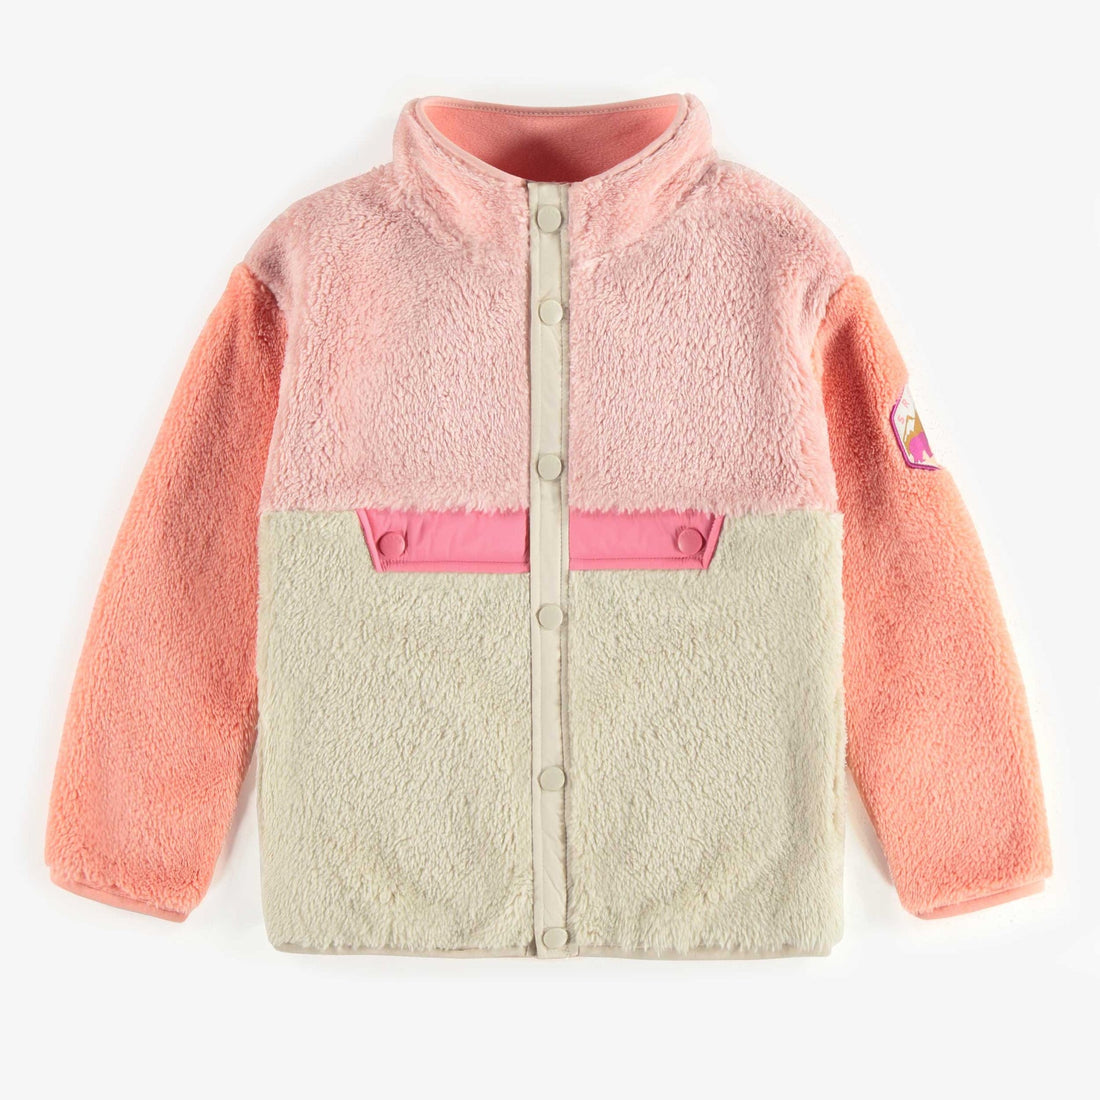 SHERPA PINK BLOCK COLOR VEST WITH HIGH COLLAR, CHILD